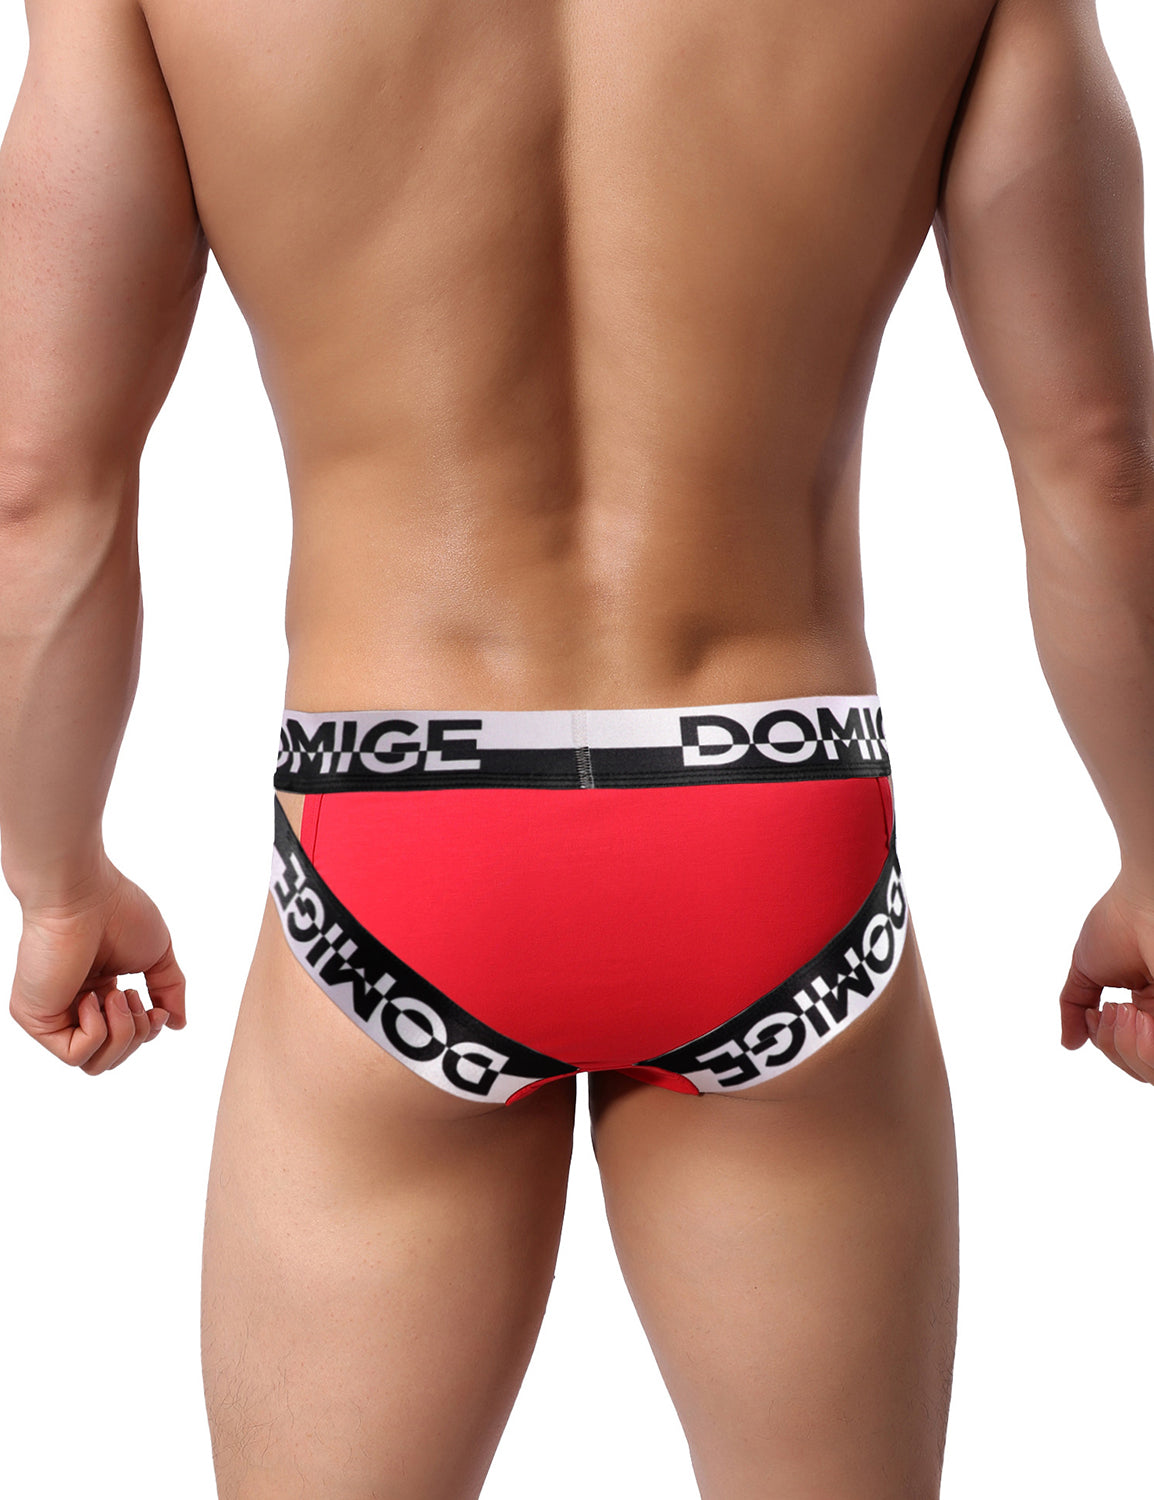 DomiGe Sexy Super Low Rise Wide Waistband Briefs